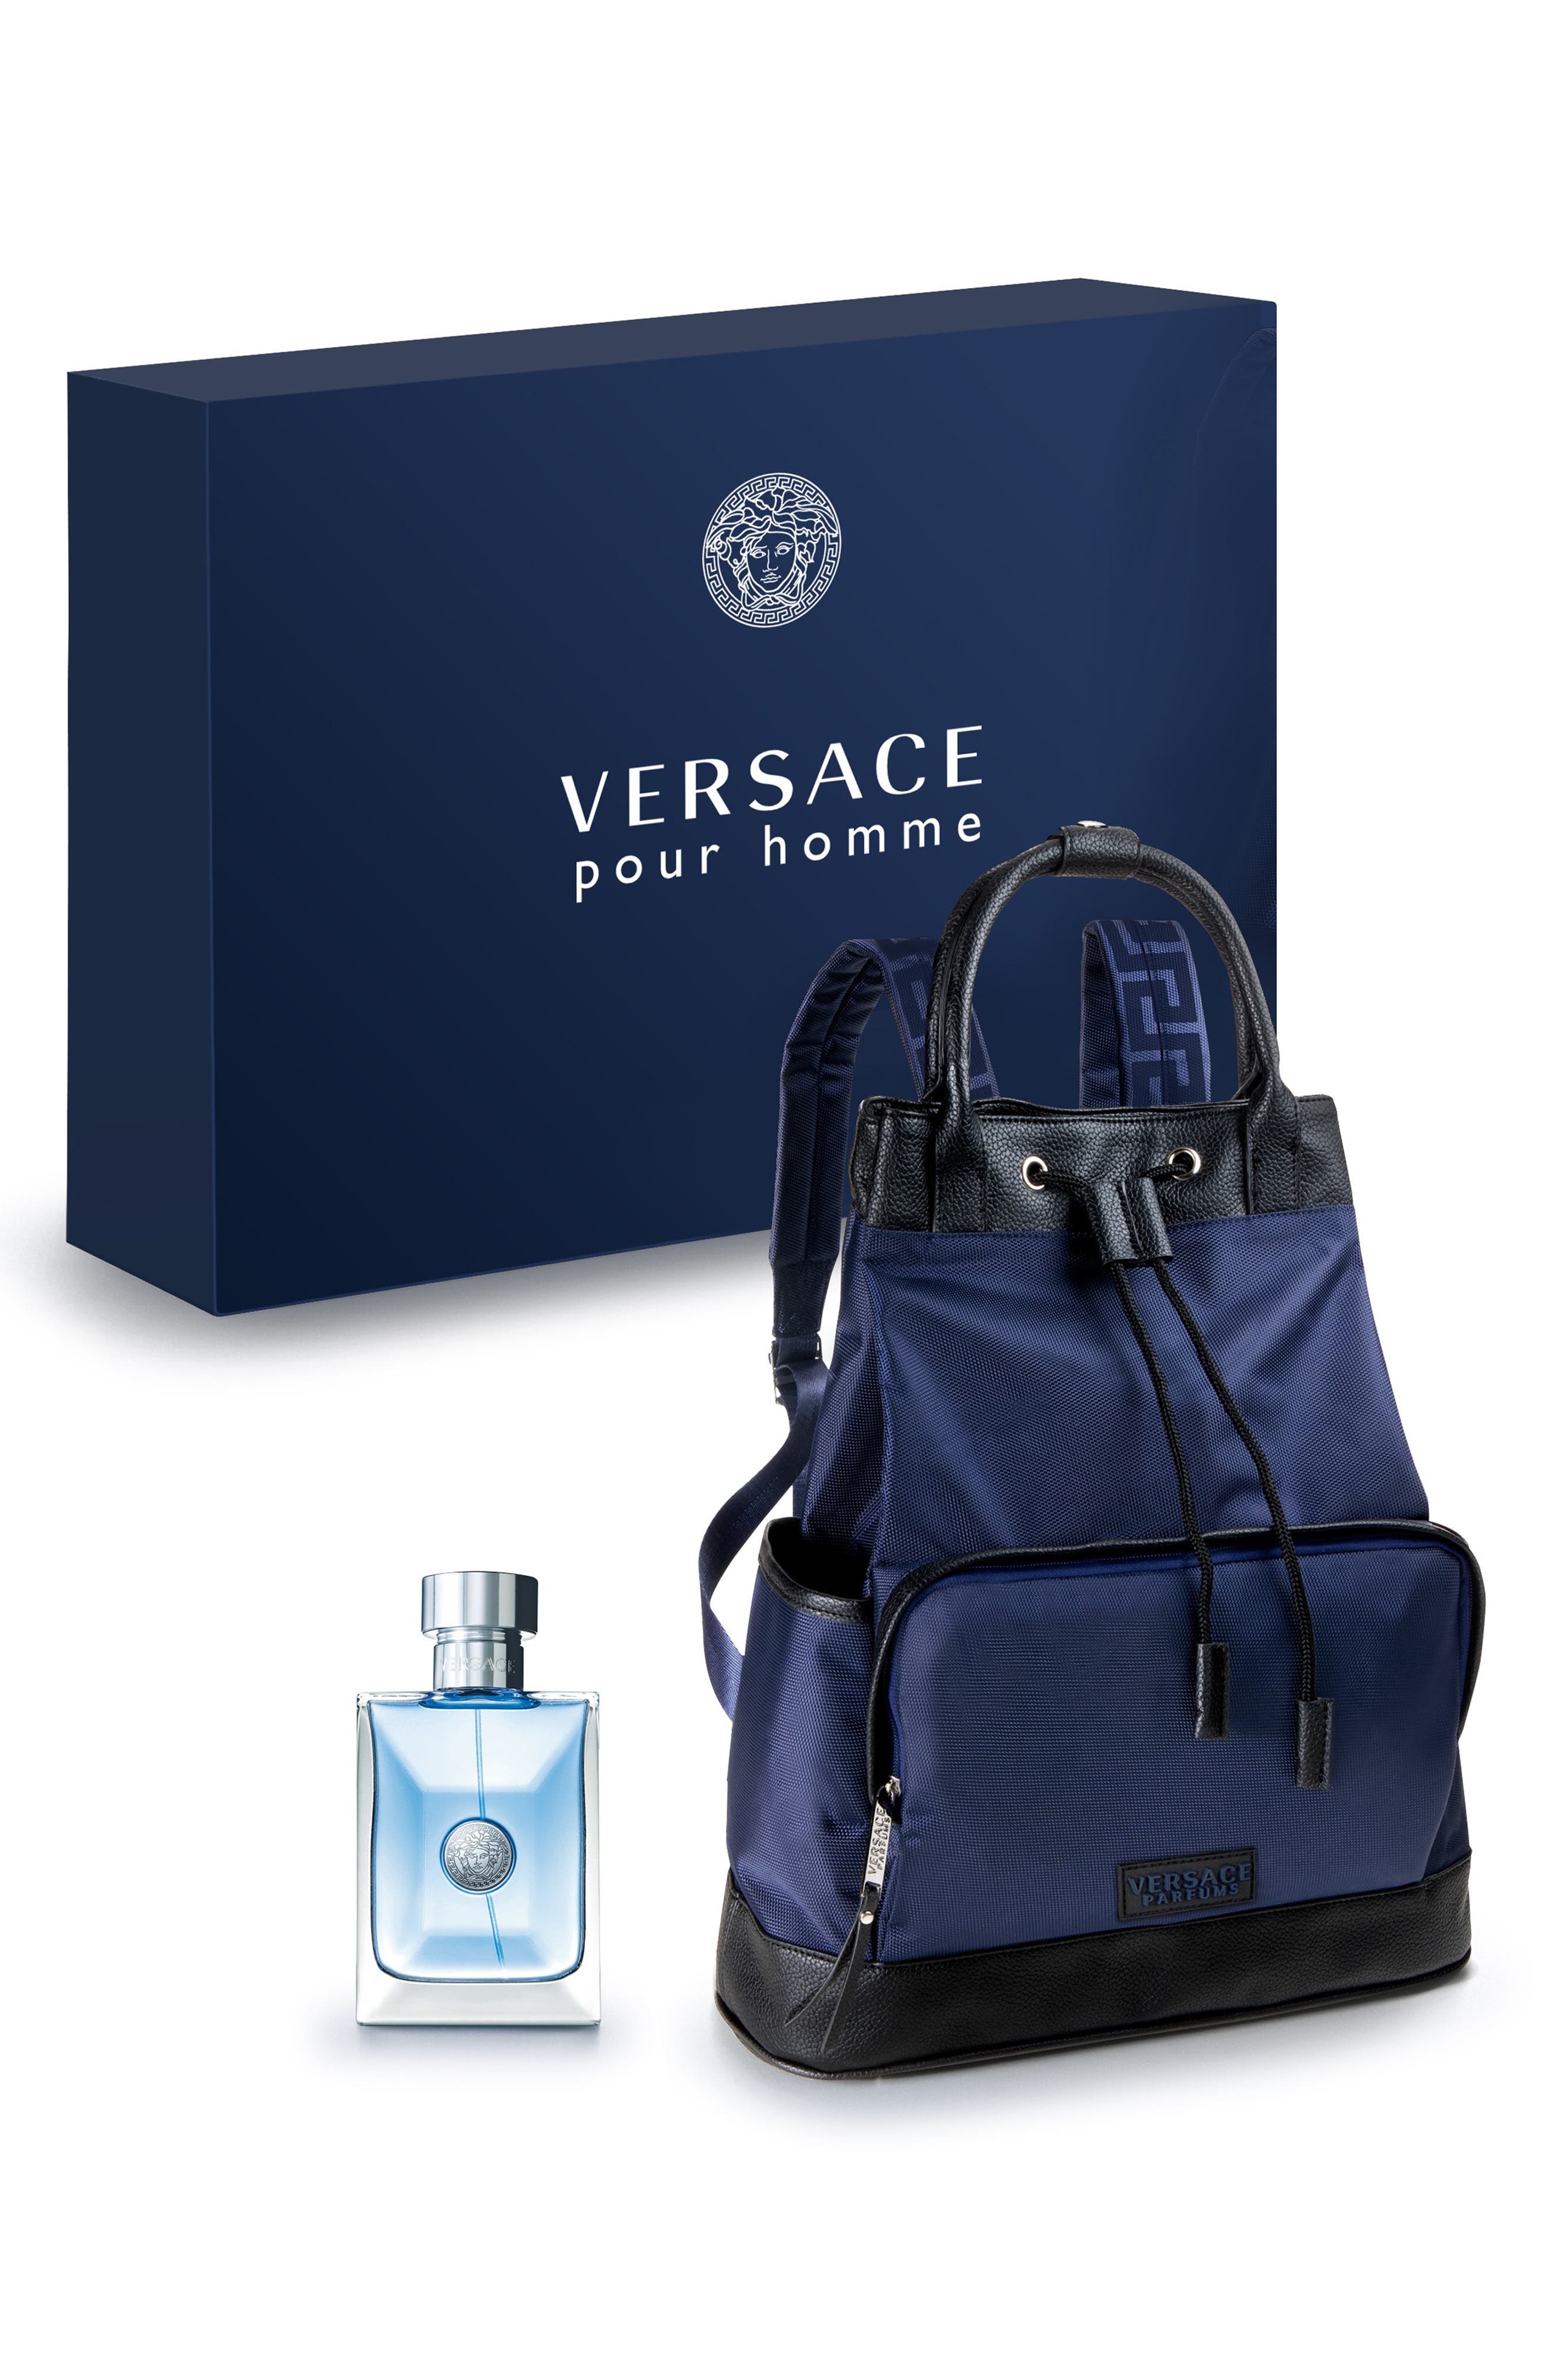 versace pour homme backpack